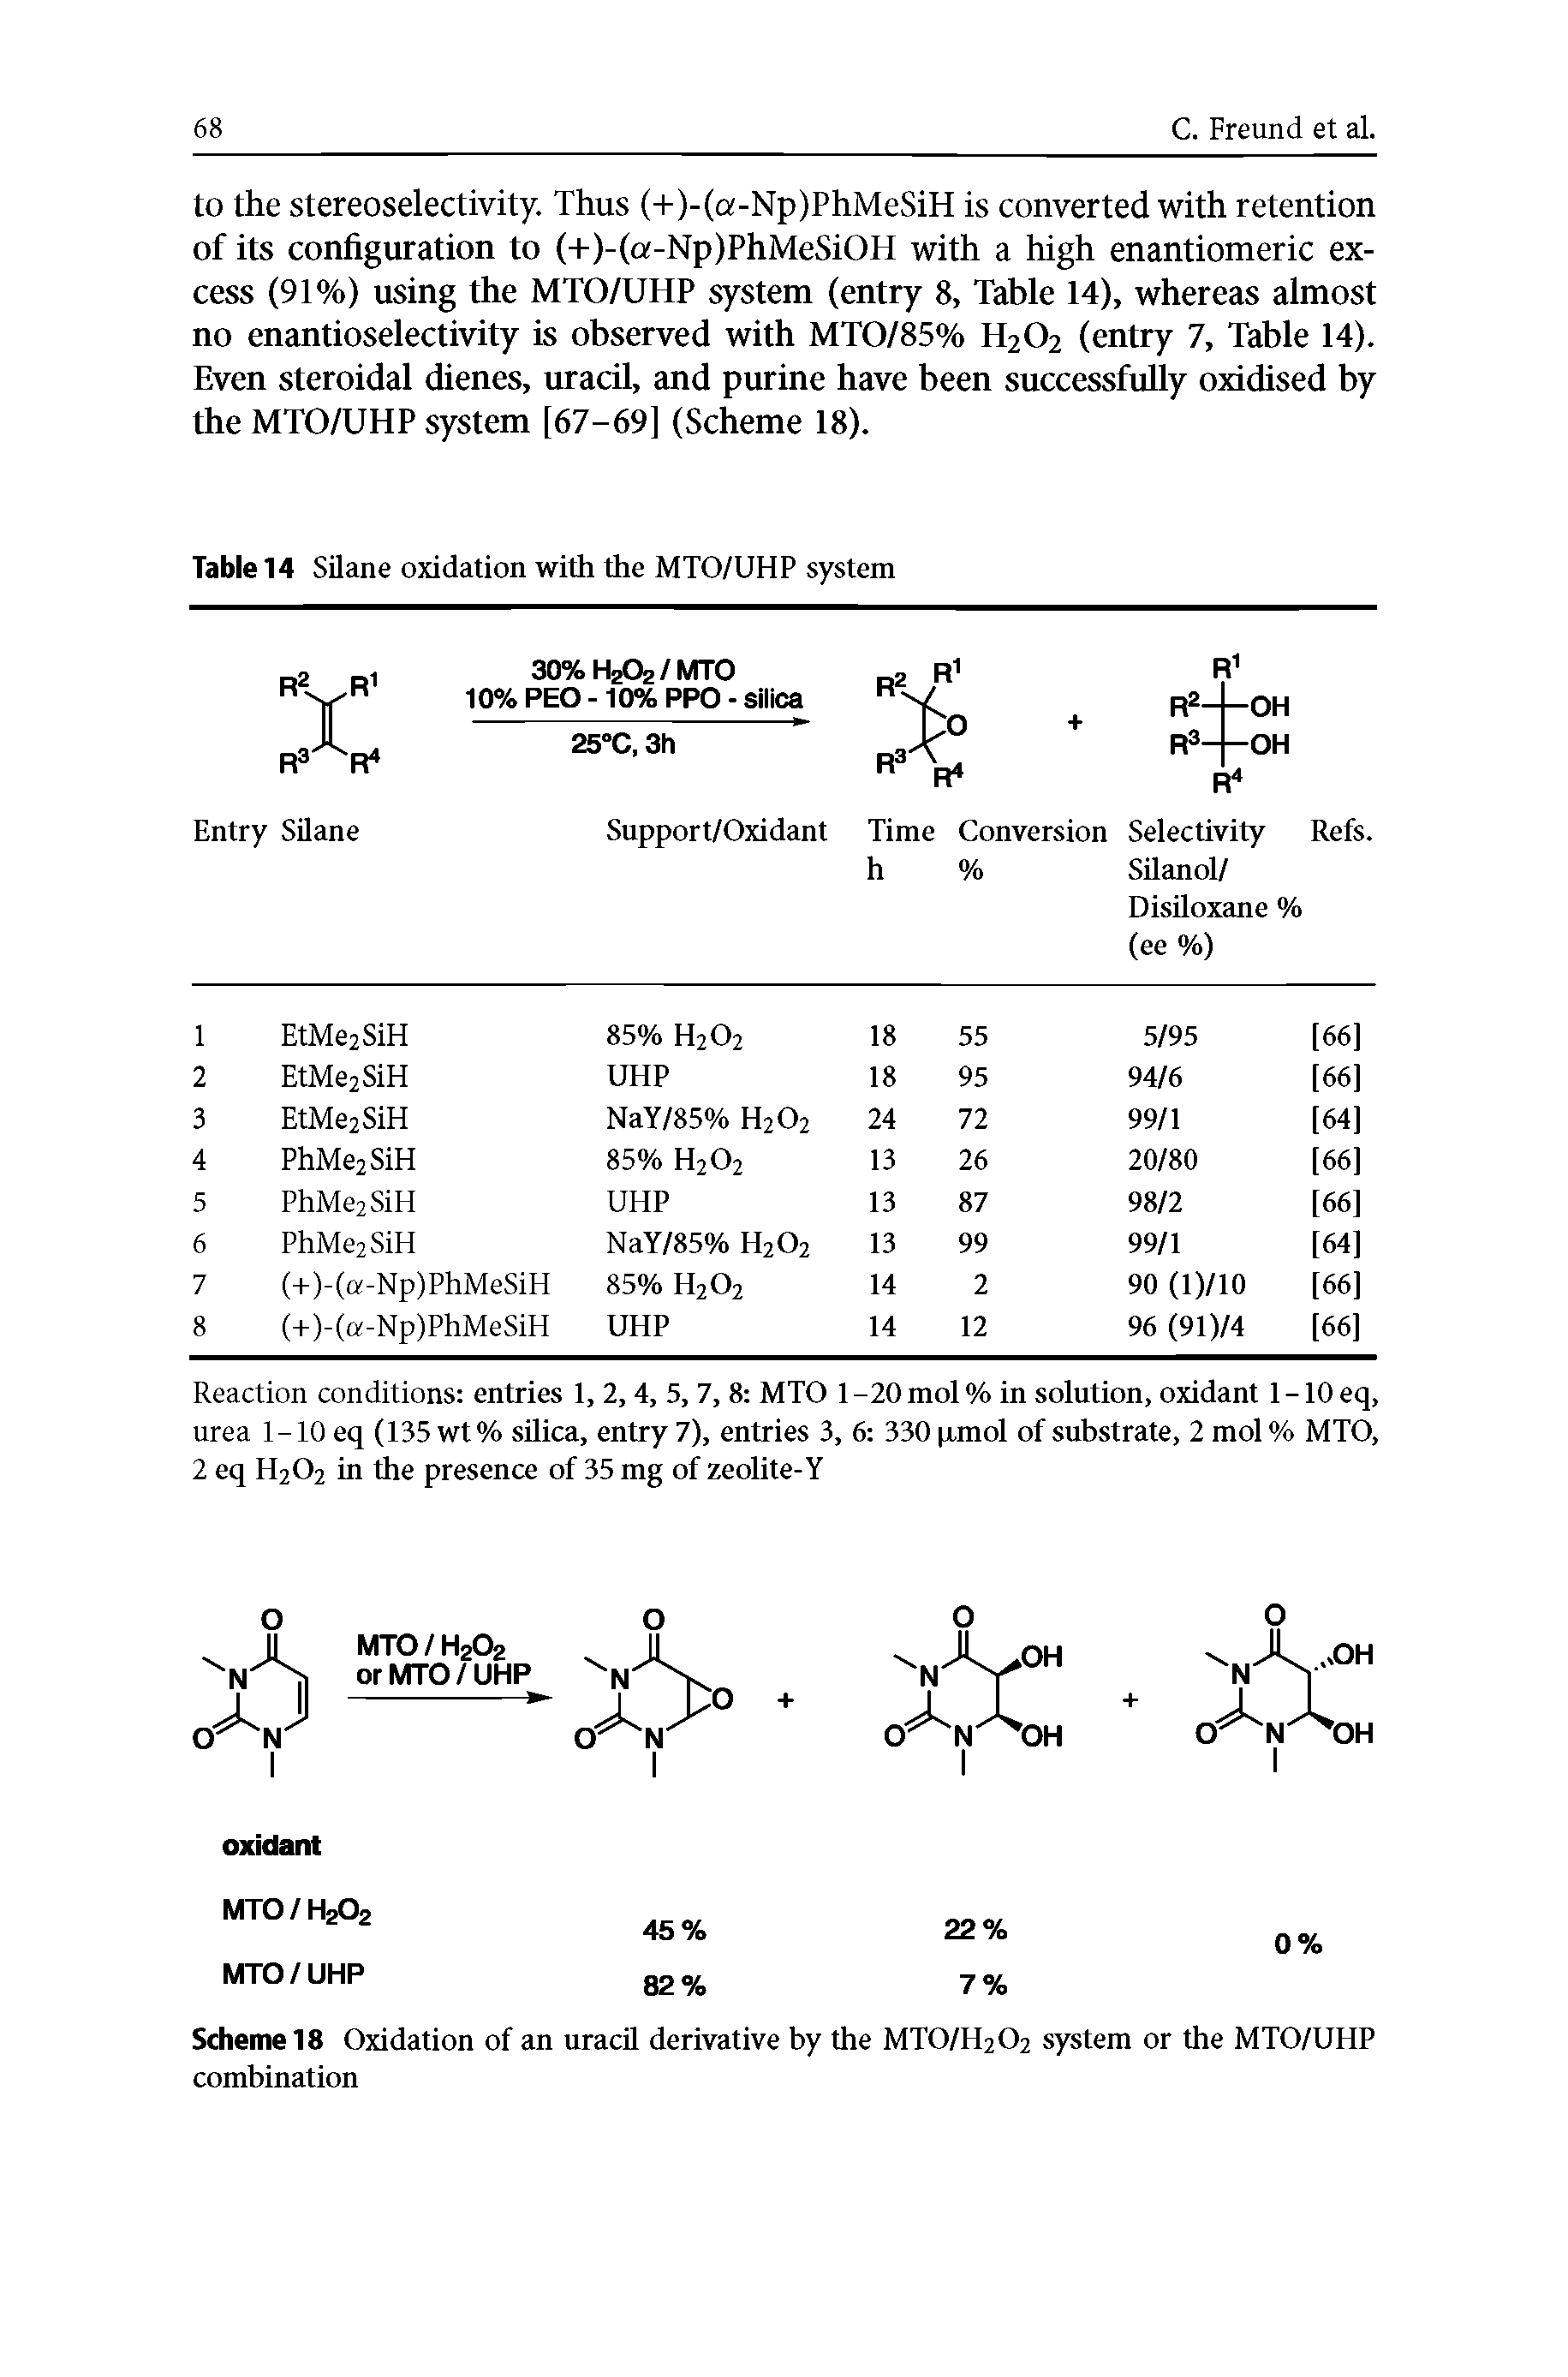 Scheme 18 Oxidation of an uracil derivative by the MTO/H2O2 system or the MTO/UHP combination...